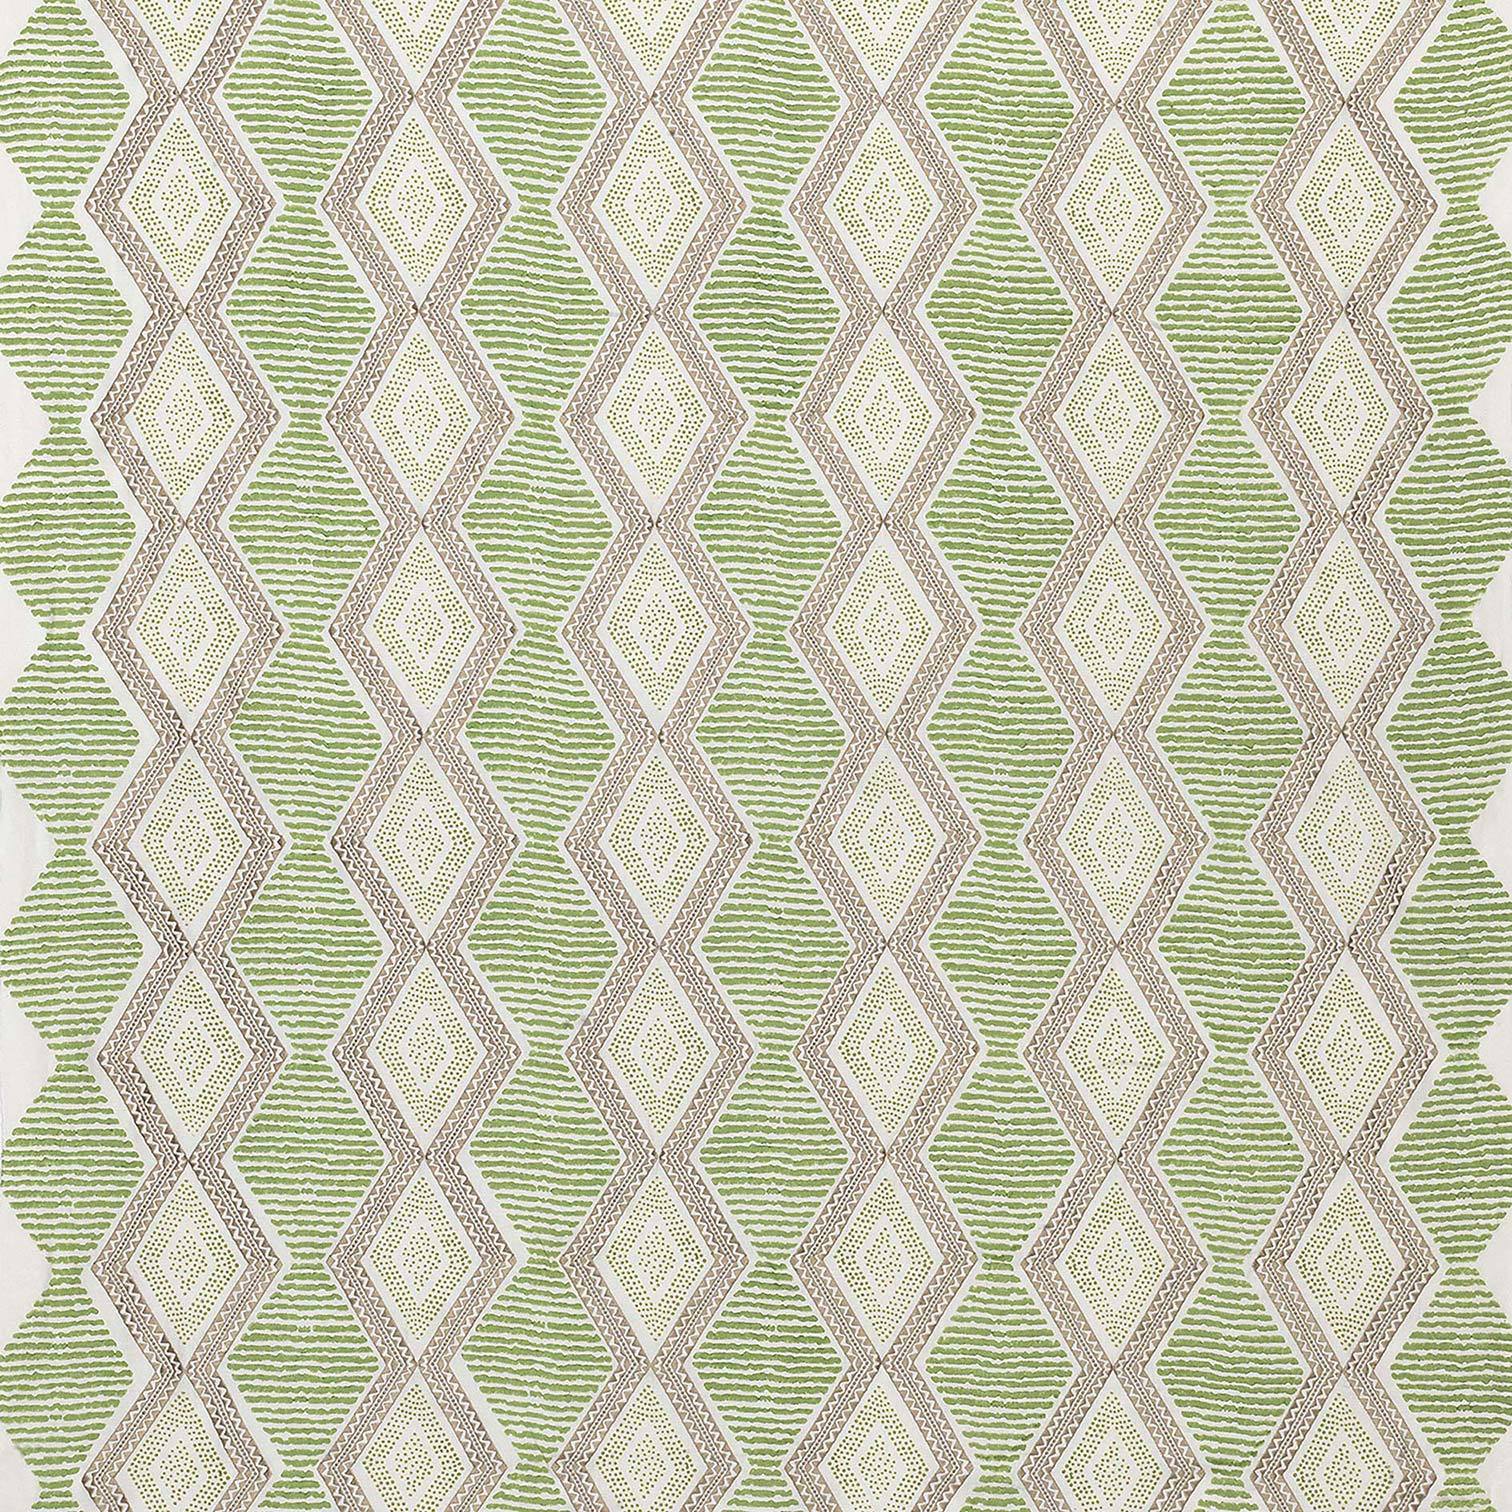 Nina Campbell Fabric - Les Rêves Belle Île Green/Beige NCF4291-03